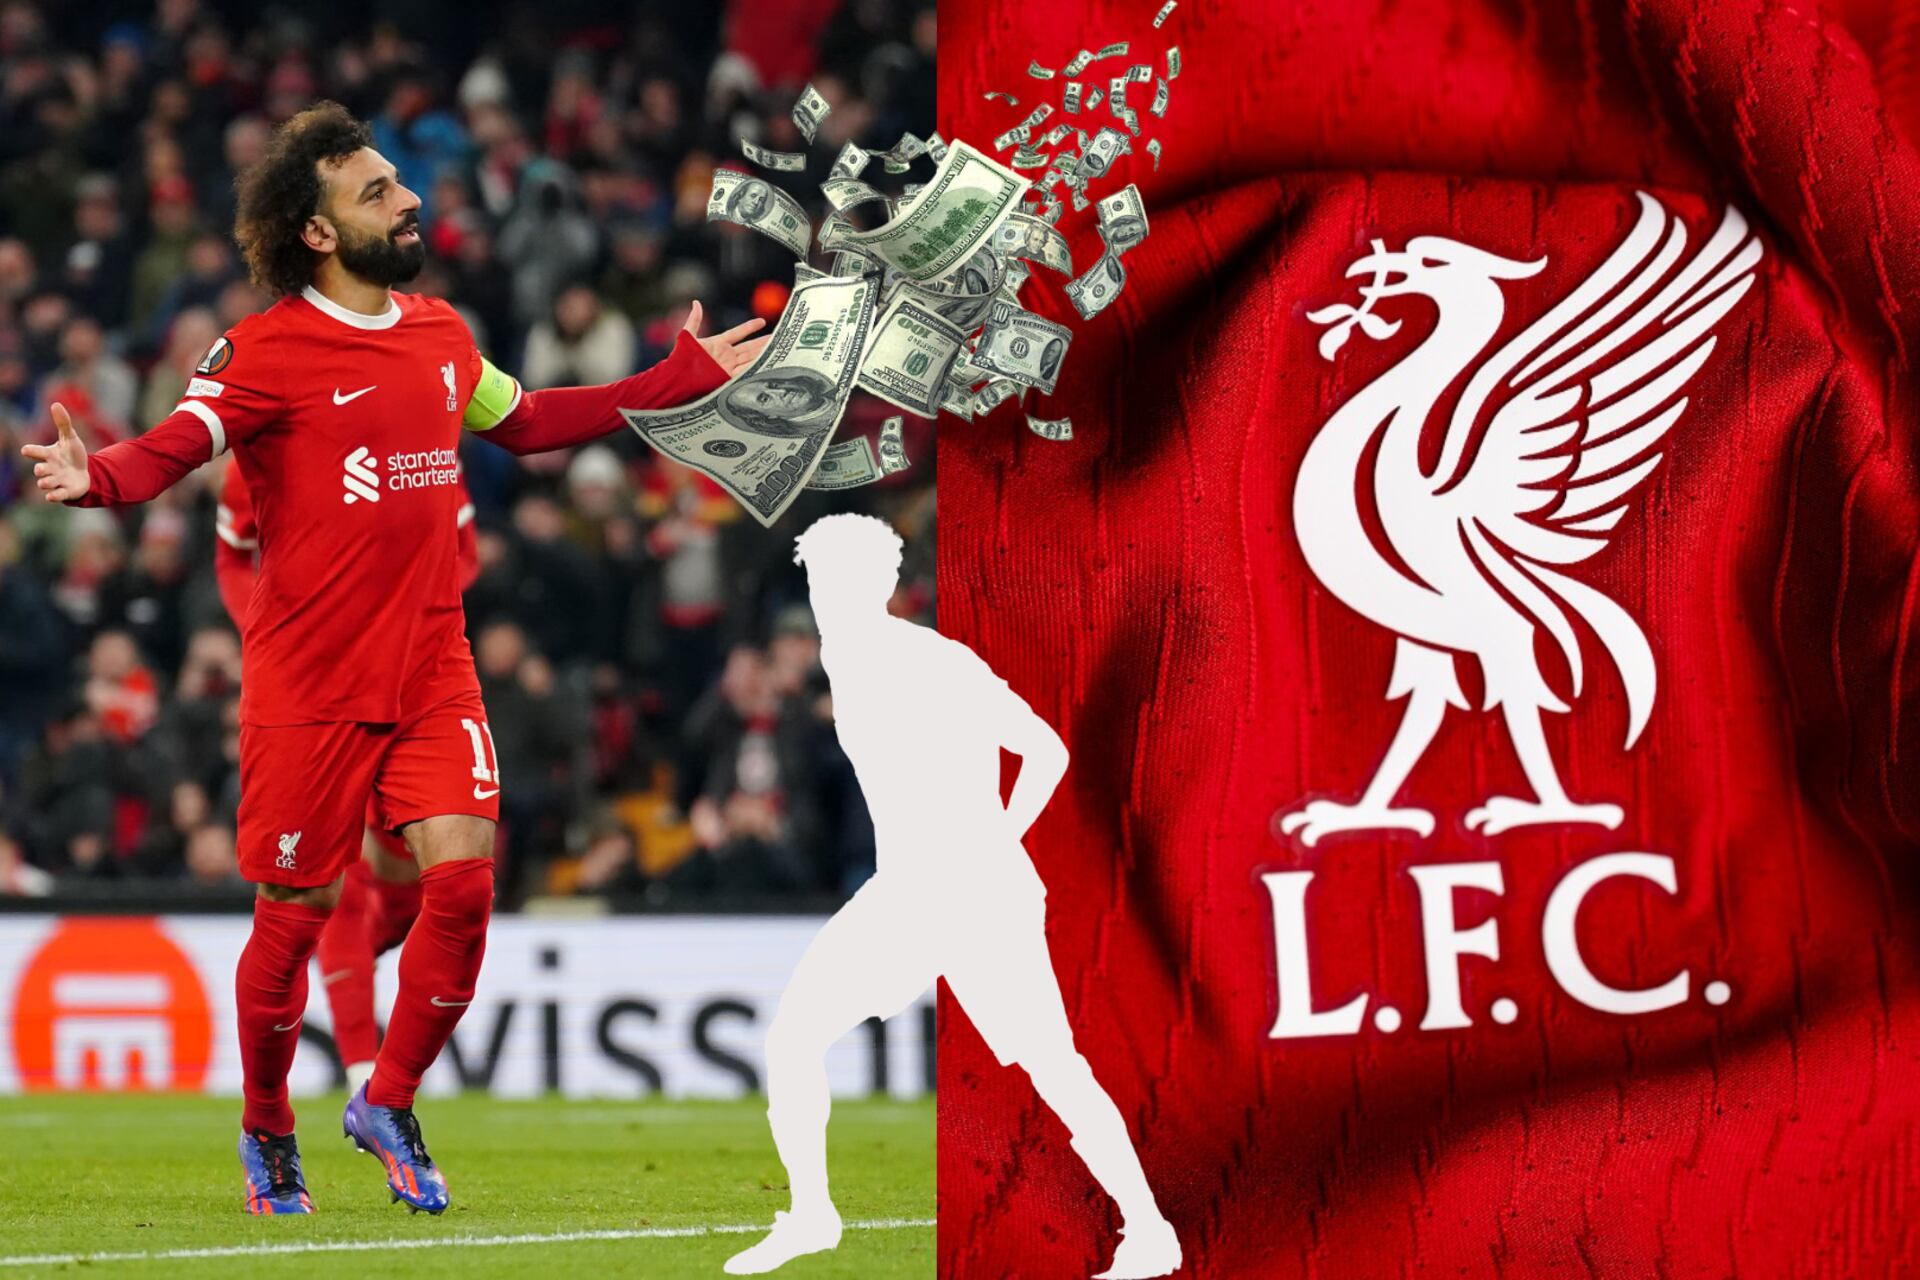 Not just Salah, the Liverpool player who could leave this summer for $94M